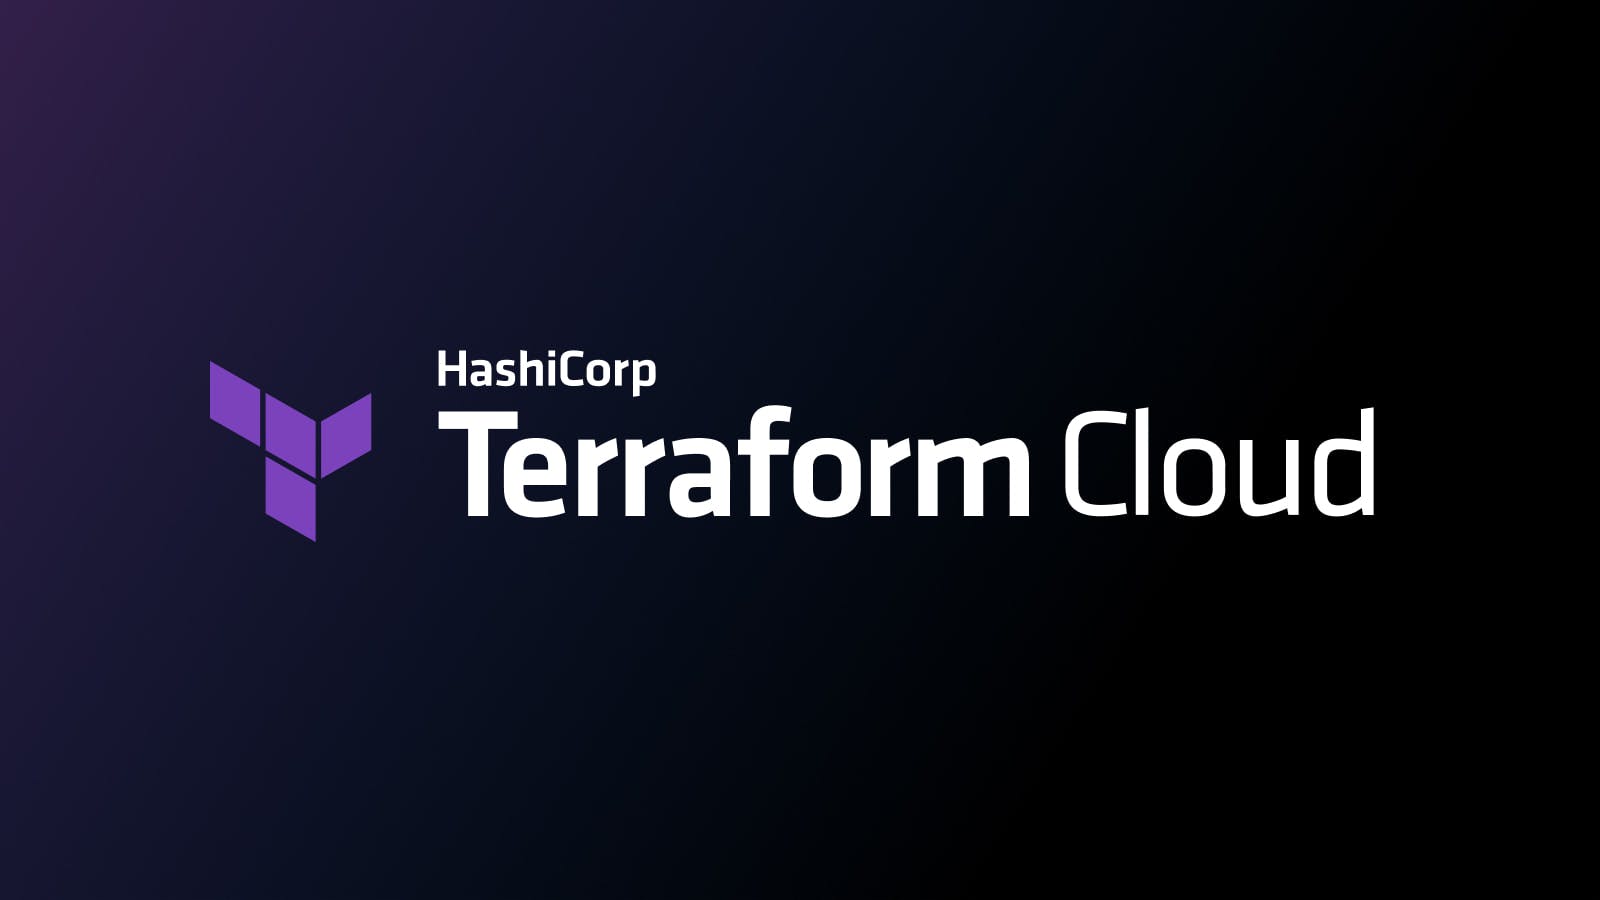 New customization options for Terraform Cloud projects